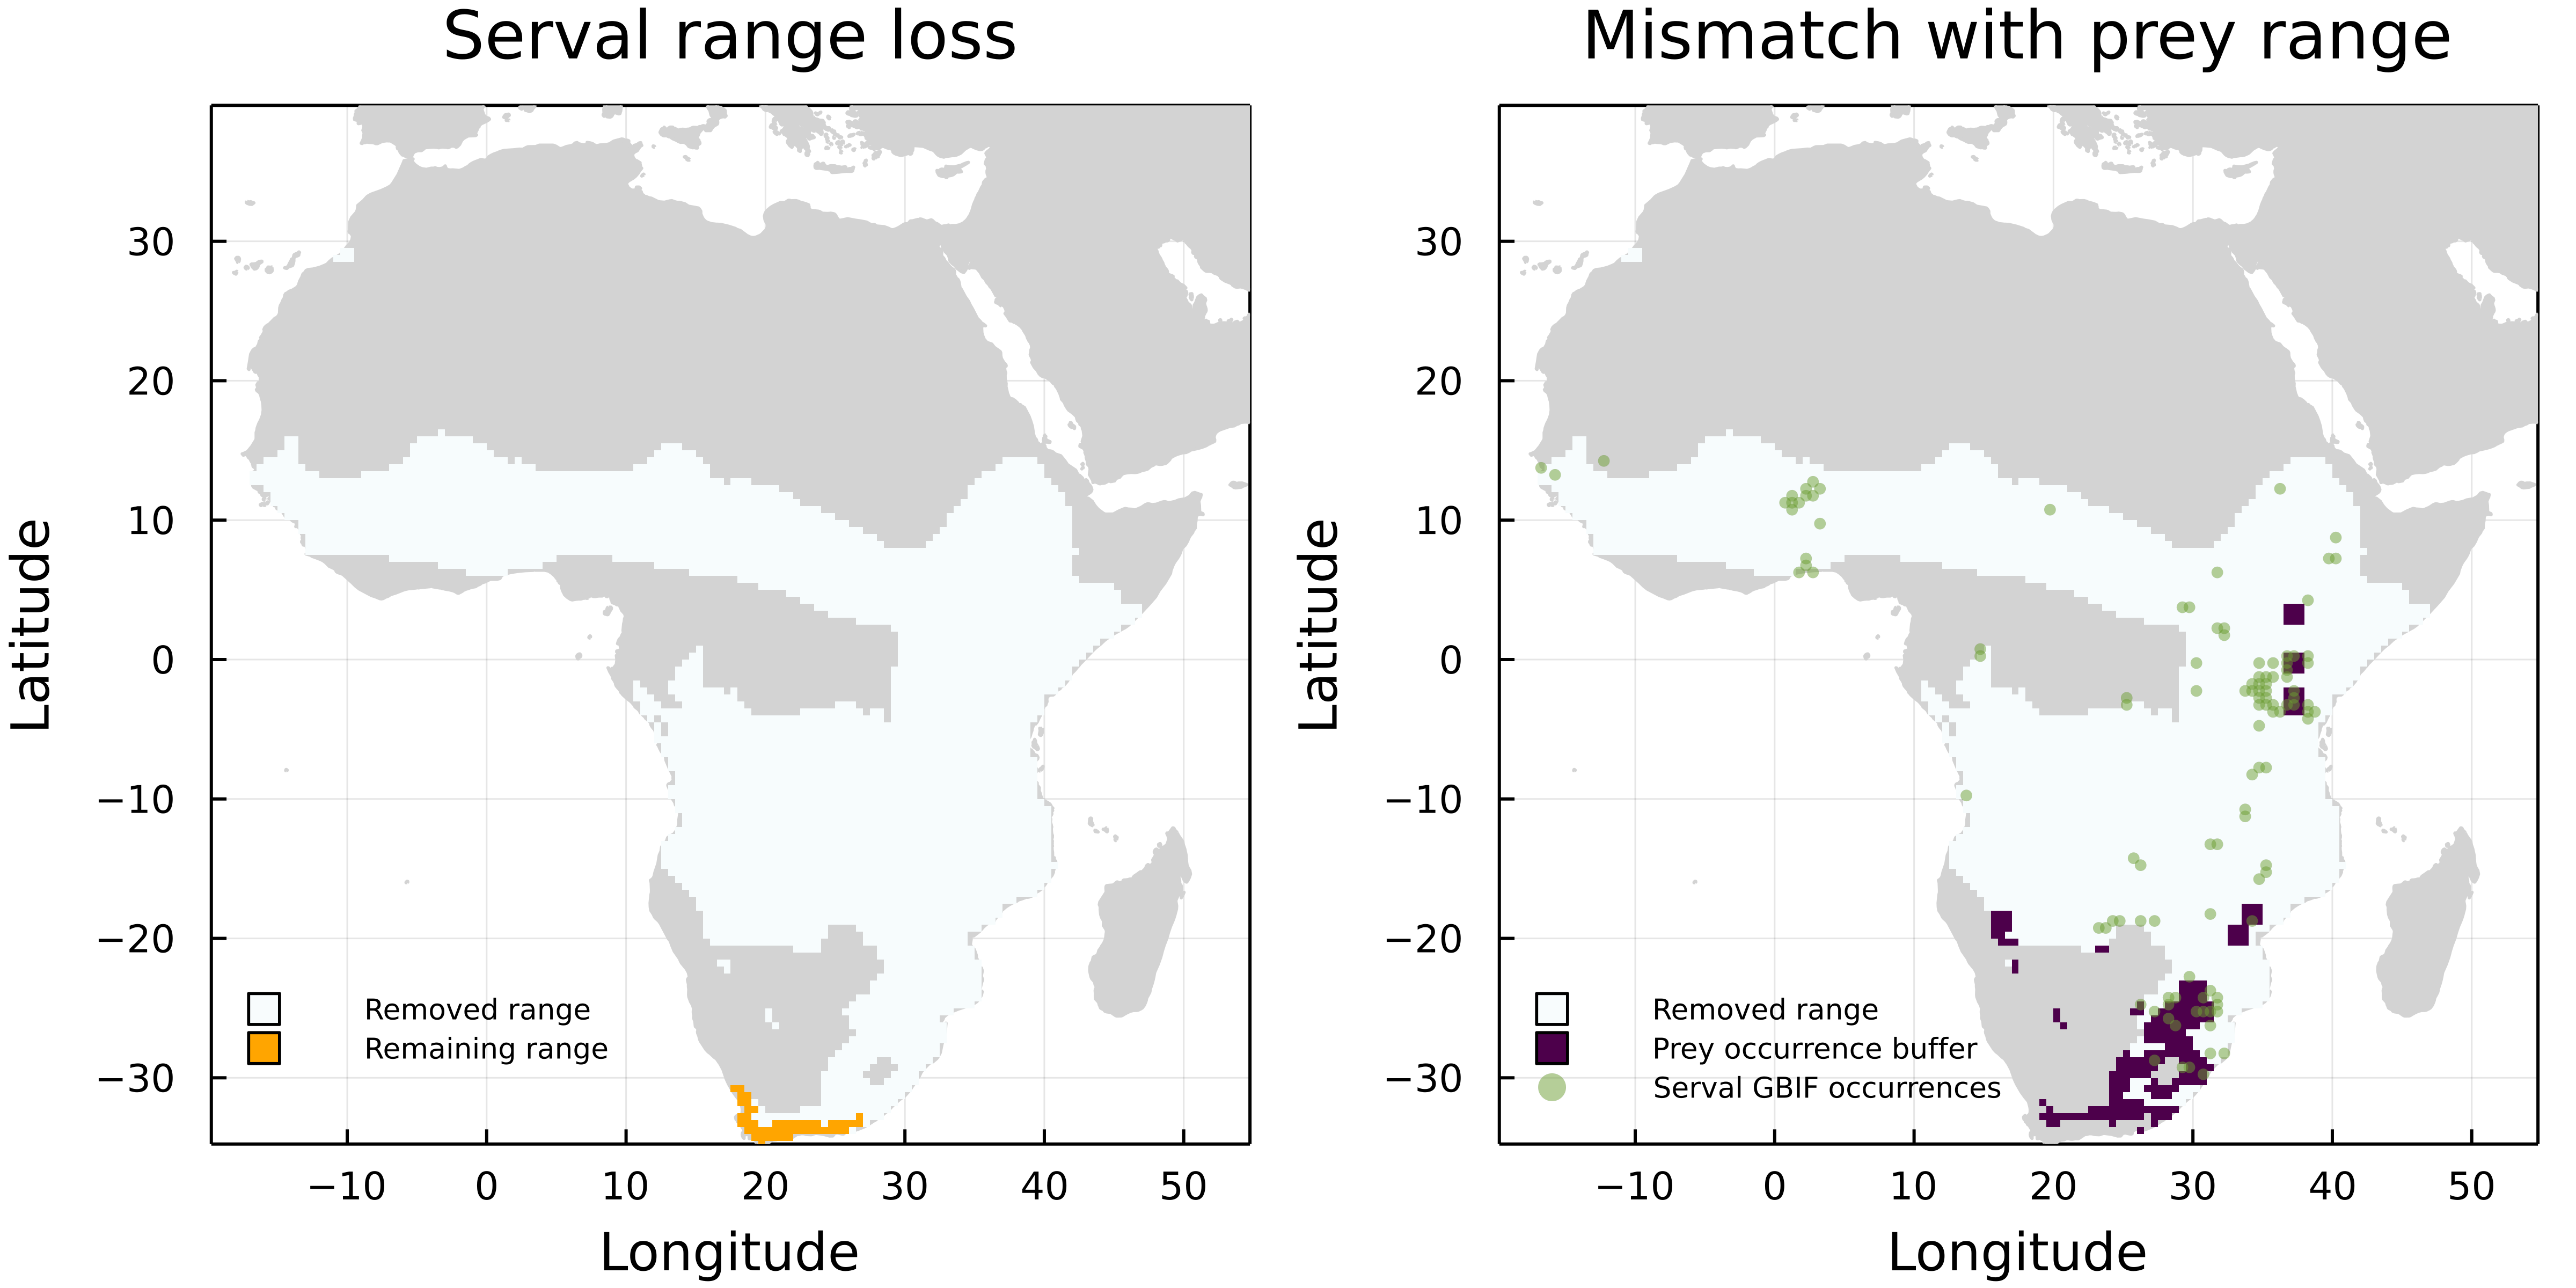 Figure 5: Mismatch between servals’ range loss and GBIF occurrence of its prey. The left panel shows the reduction of servals’ range when we consider the IUCN data of its prey. On the right panel, we added GBIF data on both serval and its prey, with a buffer for the prey to account for species mobility.